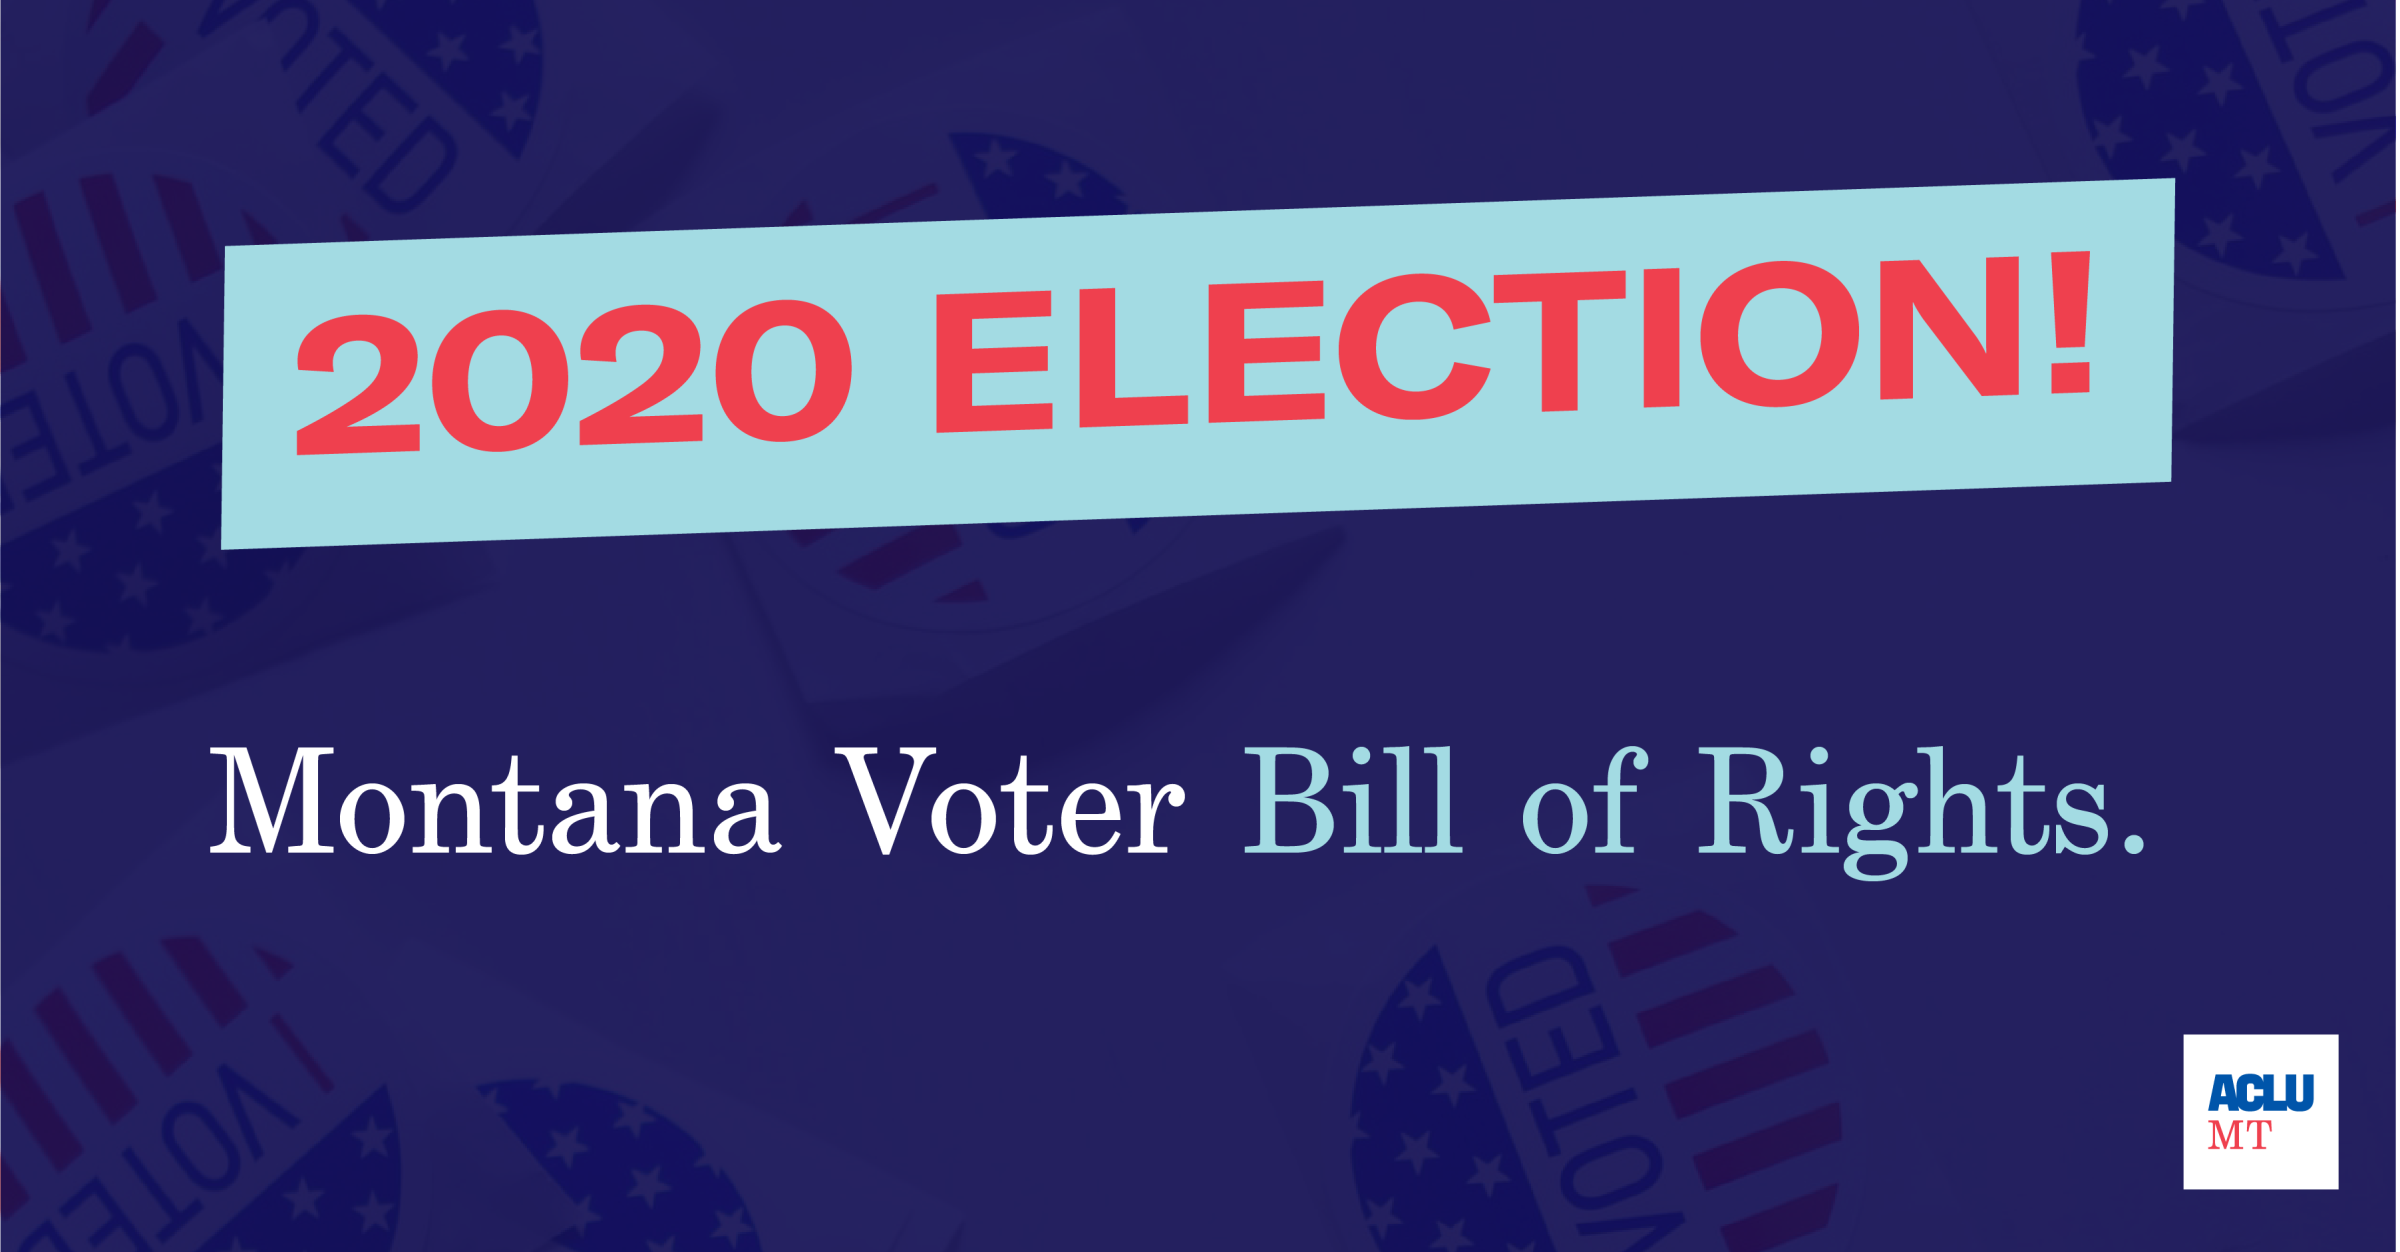 Graphic of 2020 election bill of rights